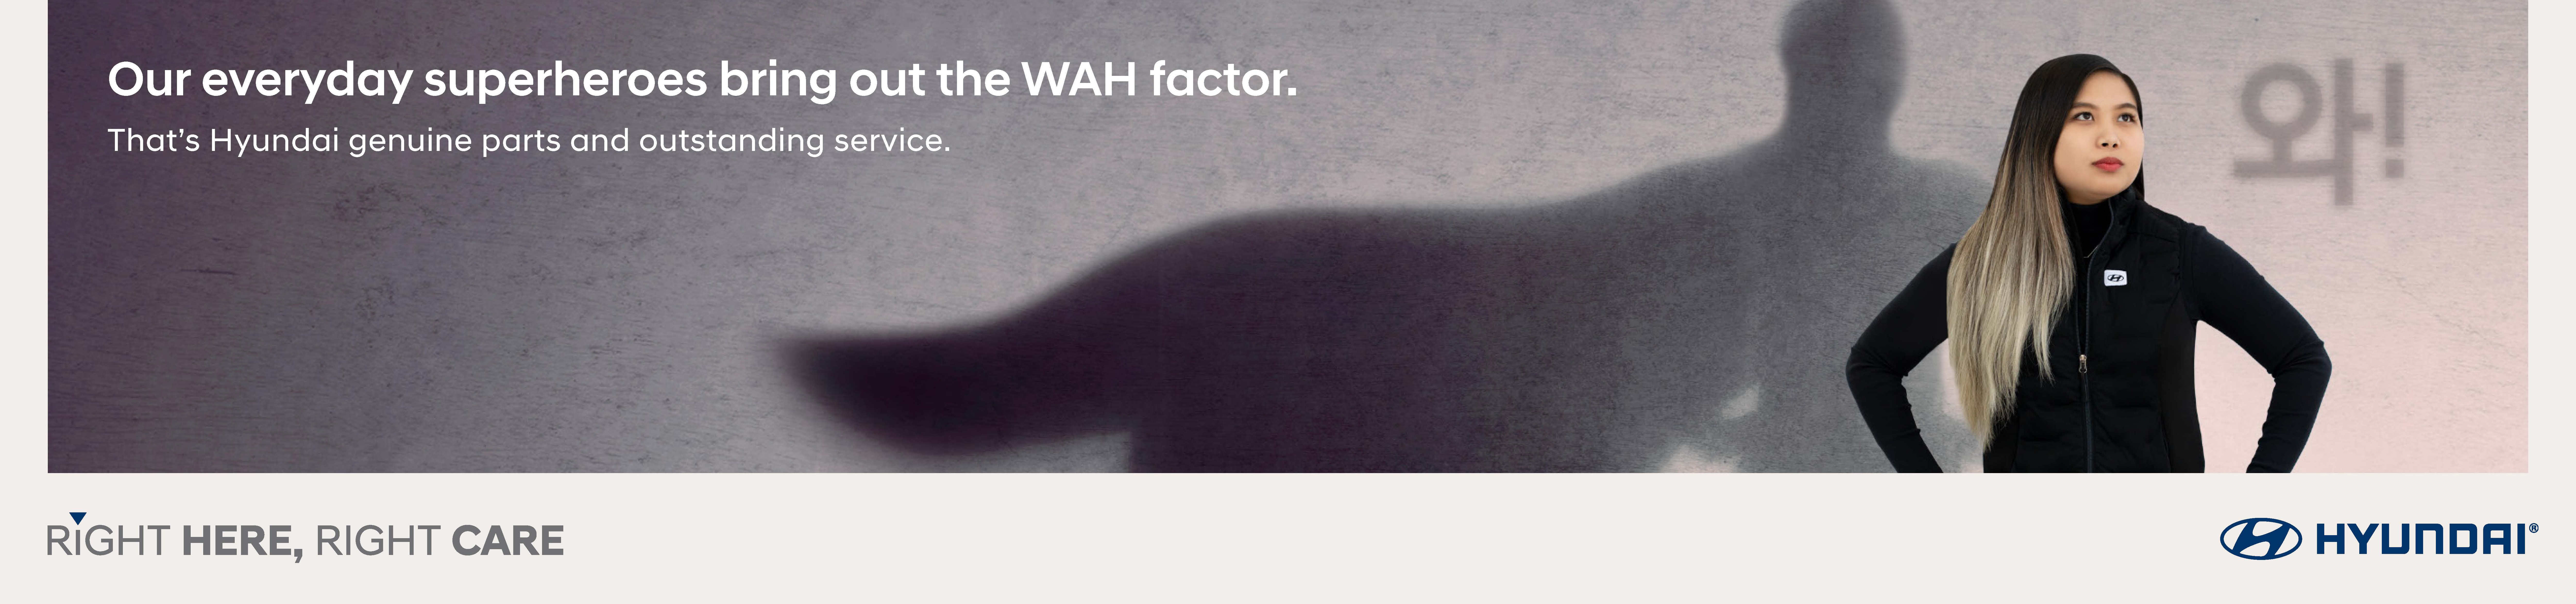 Our everyday superheroes bring out the WAH factor.